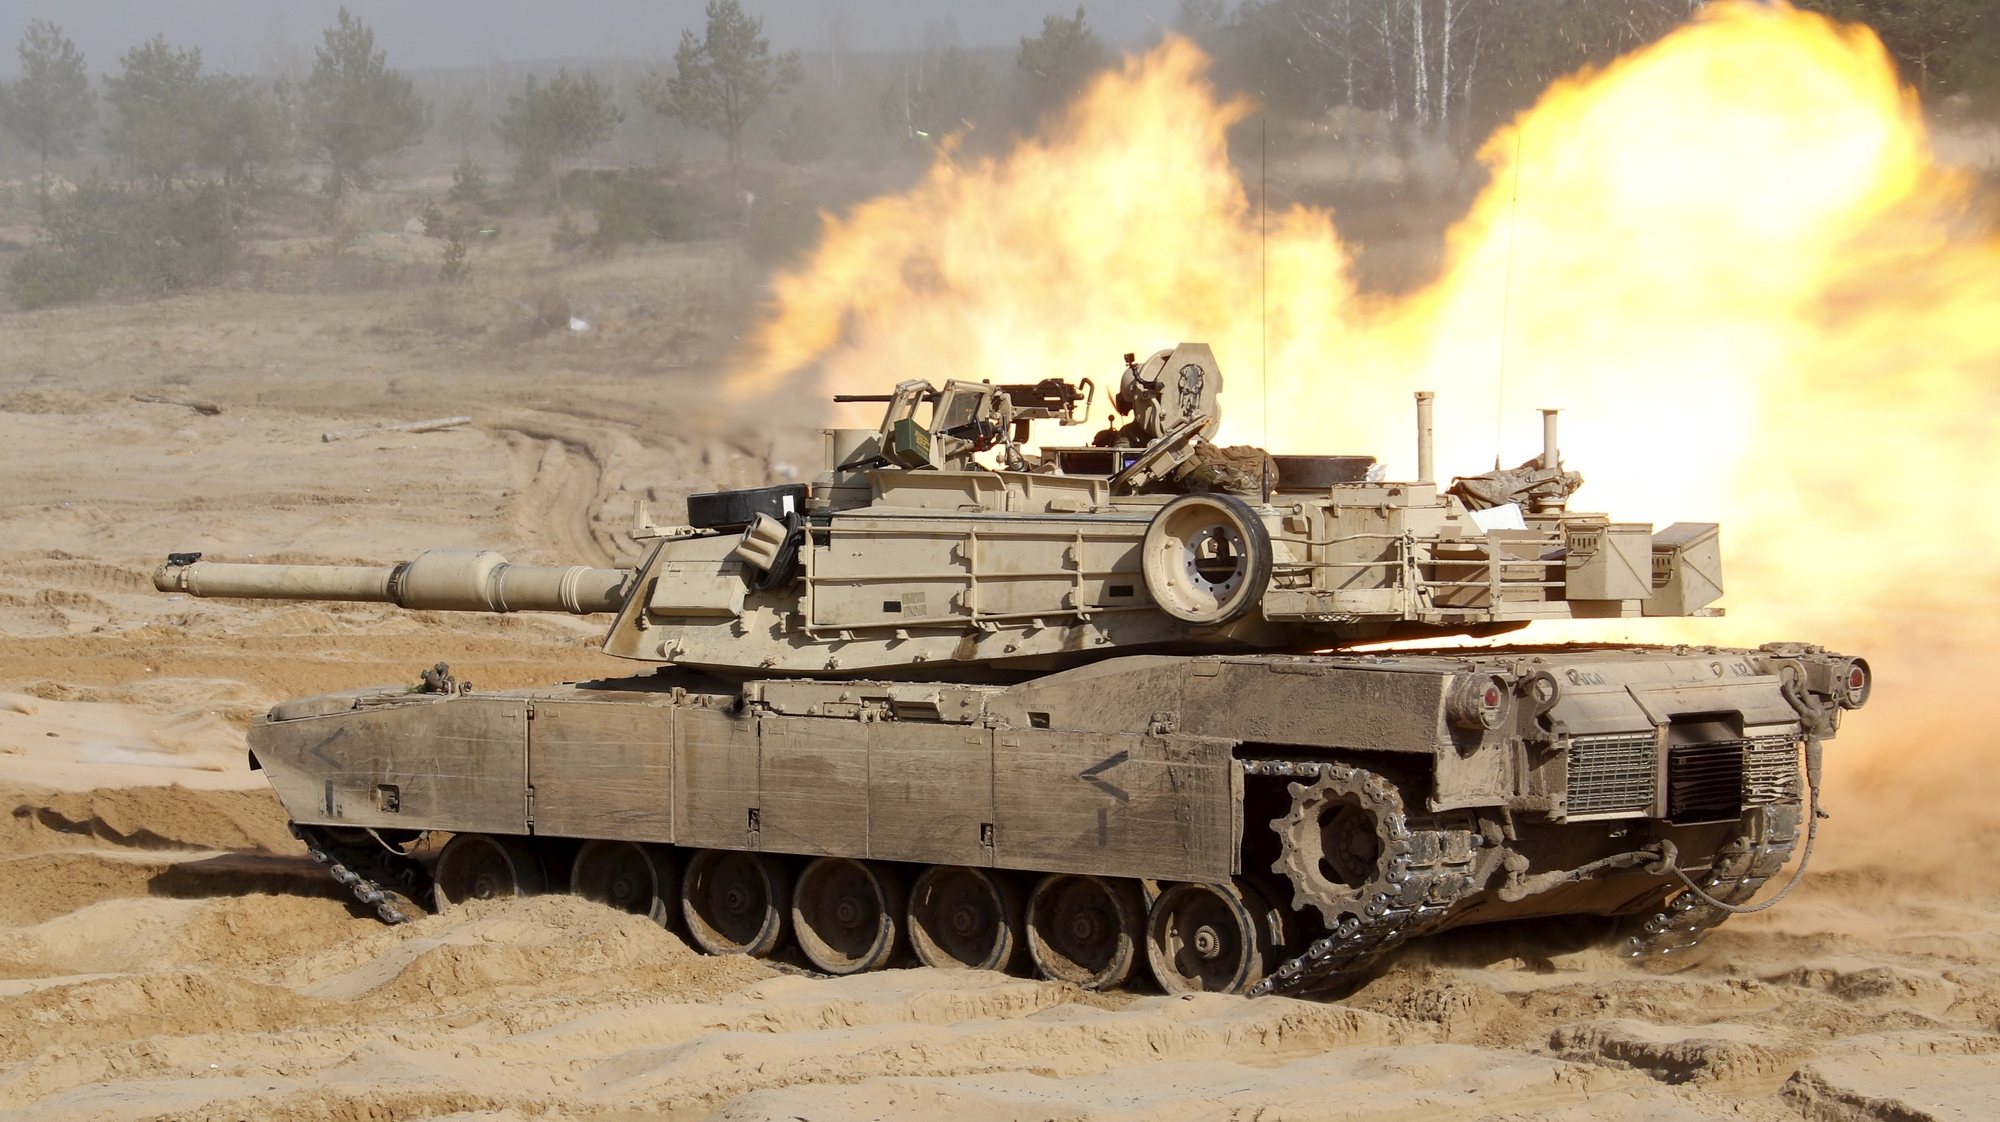 epa10429124 (FILE) - U.S. soldiers of the NATO Extended Presence Battlegroup with their &#039;M1A1 Abrams&#039; battle tank participiate in the military exercise Crystal Arrow 2021 in Adazi Militari base, Latvia, 26 March 2021 (reissued 25 January 2023). The US are to send some 31 of their M1 Abrams tanks to the Ukraine, US President Biden announced on 25 January 2023. The annnouncement comes the same day Germany cleared the way for deliveries of German-made Leopard 2 tanks to the Ukraine. Russian troops entered Ukraine territory on 24 February 2022, starting an armed conflict that has provoked destruction and a humanitarian crisis.  EPA/VALDA KALNINA *** Local Caption *** 56789482